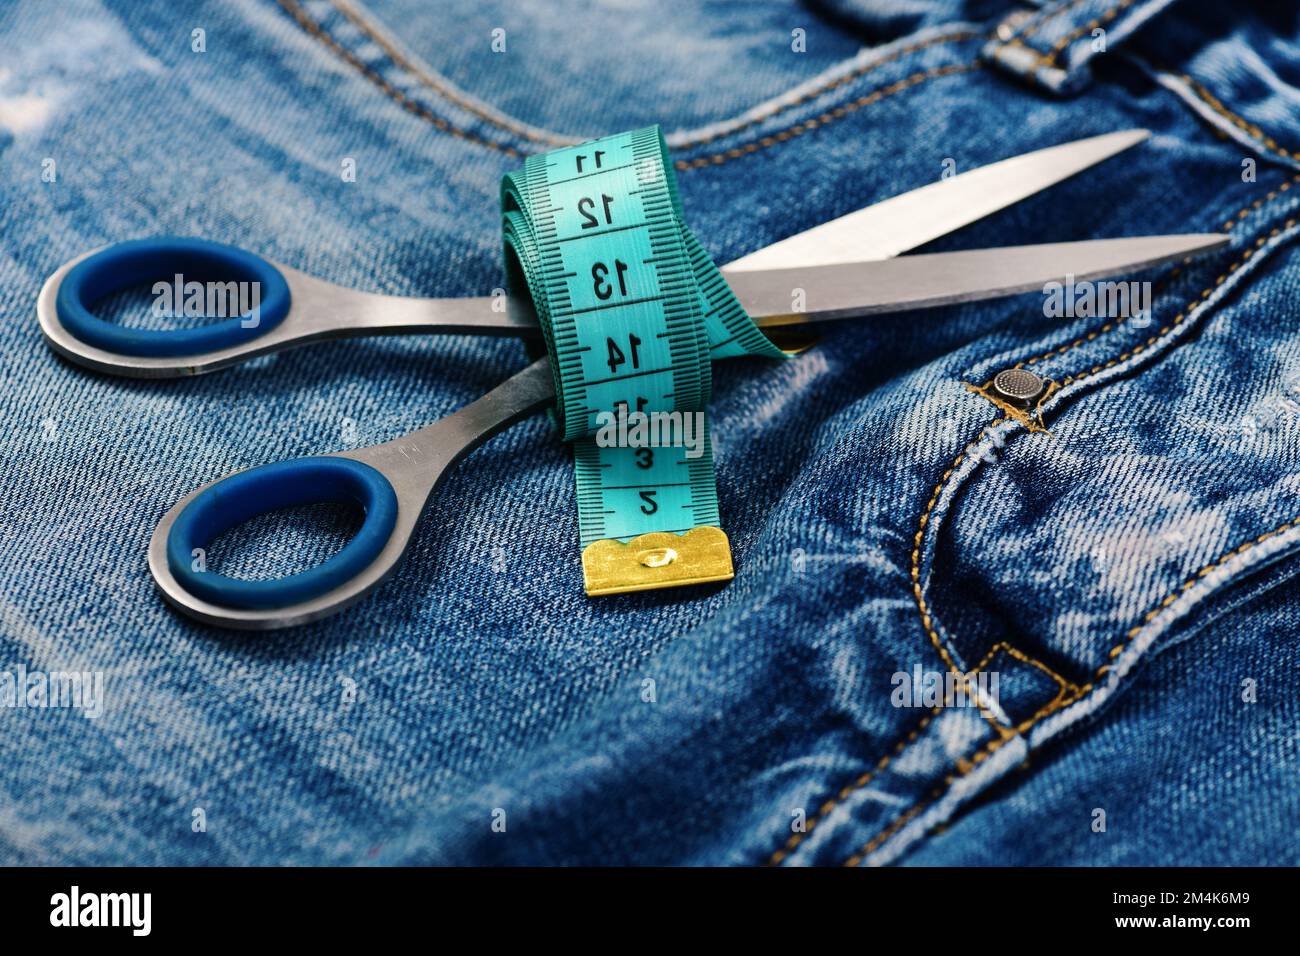 https://c8.alamy.com/comp/2M4K6M9/jeans-crotch-and-pocket-with-scissors-and-measure-tape-2M4K6M9.jpg